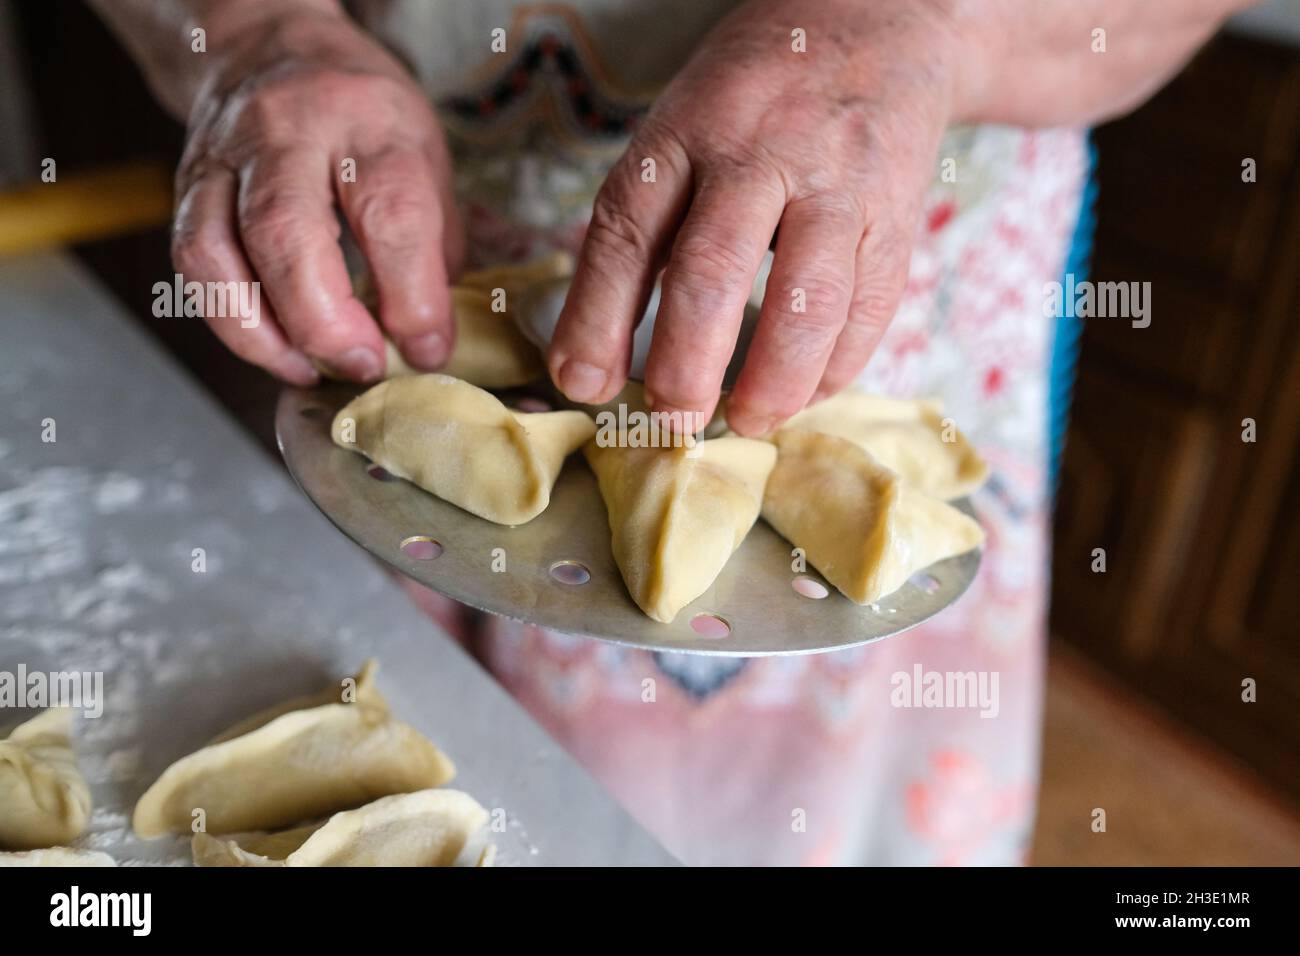 Special device for cooking dough. Preparing manti, a dish of dough. Lay down portioned dumplings Stock Photo